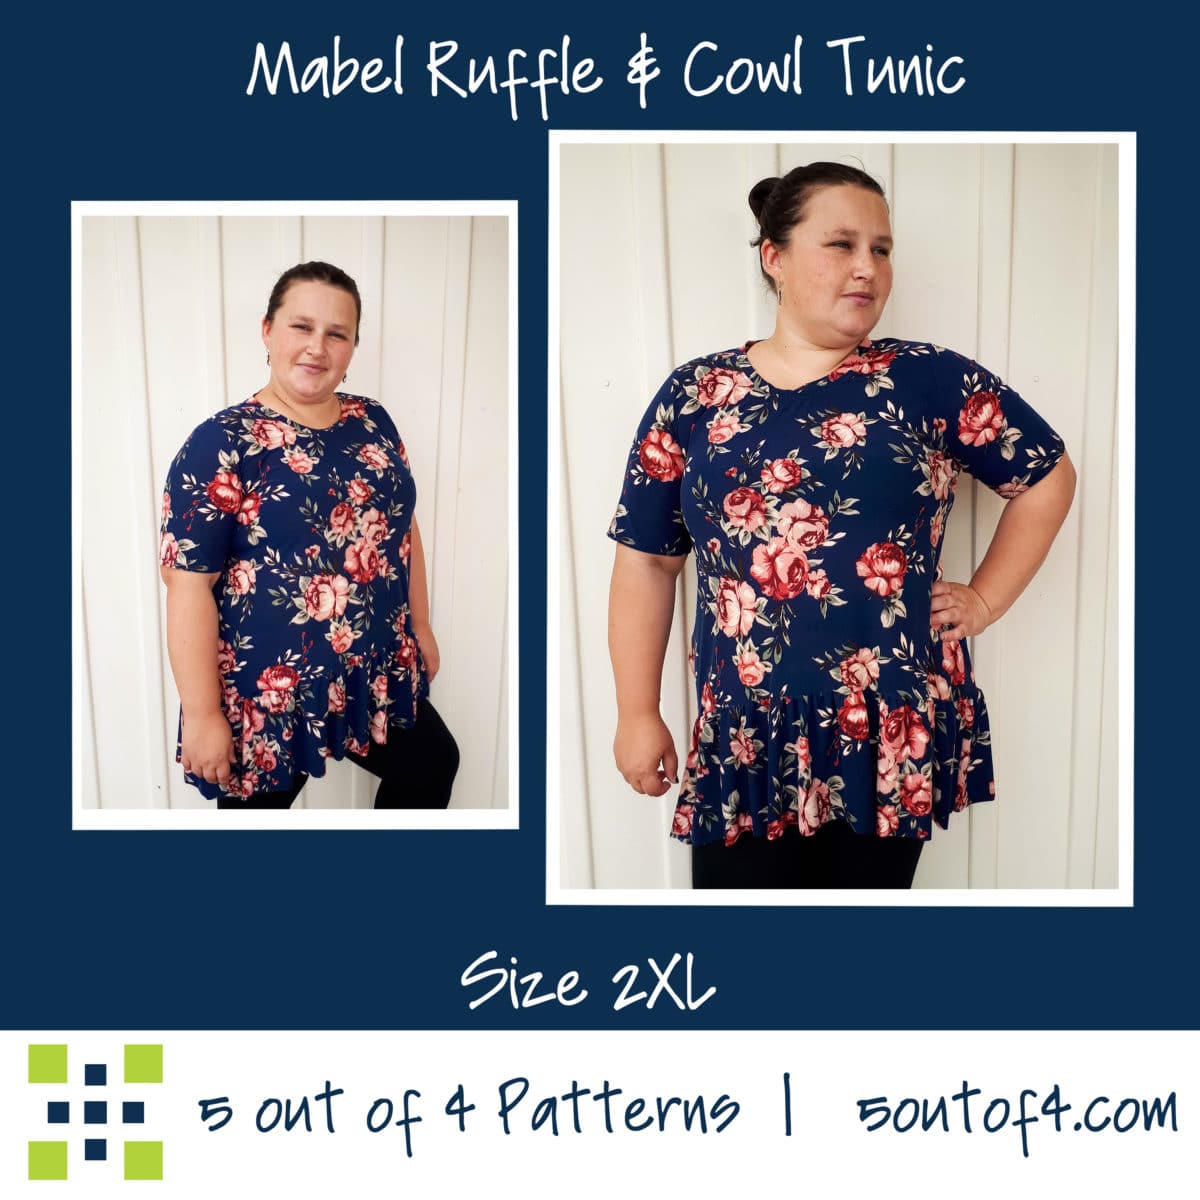 Mabel Ruffle and Cowl Tunic - 5 out of 4 Patterns